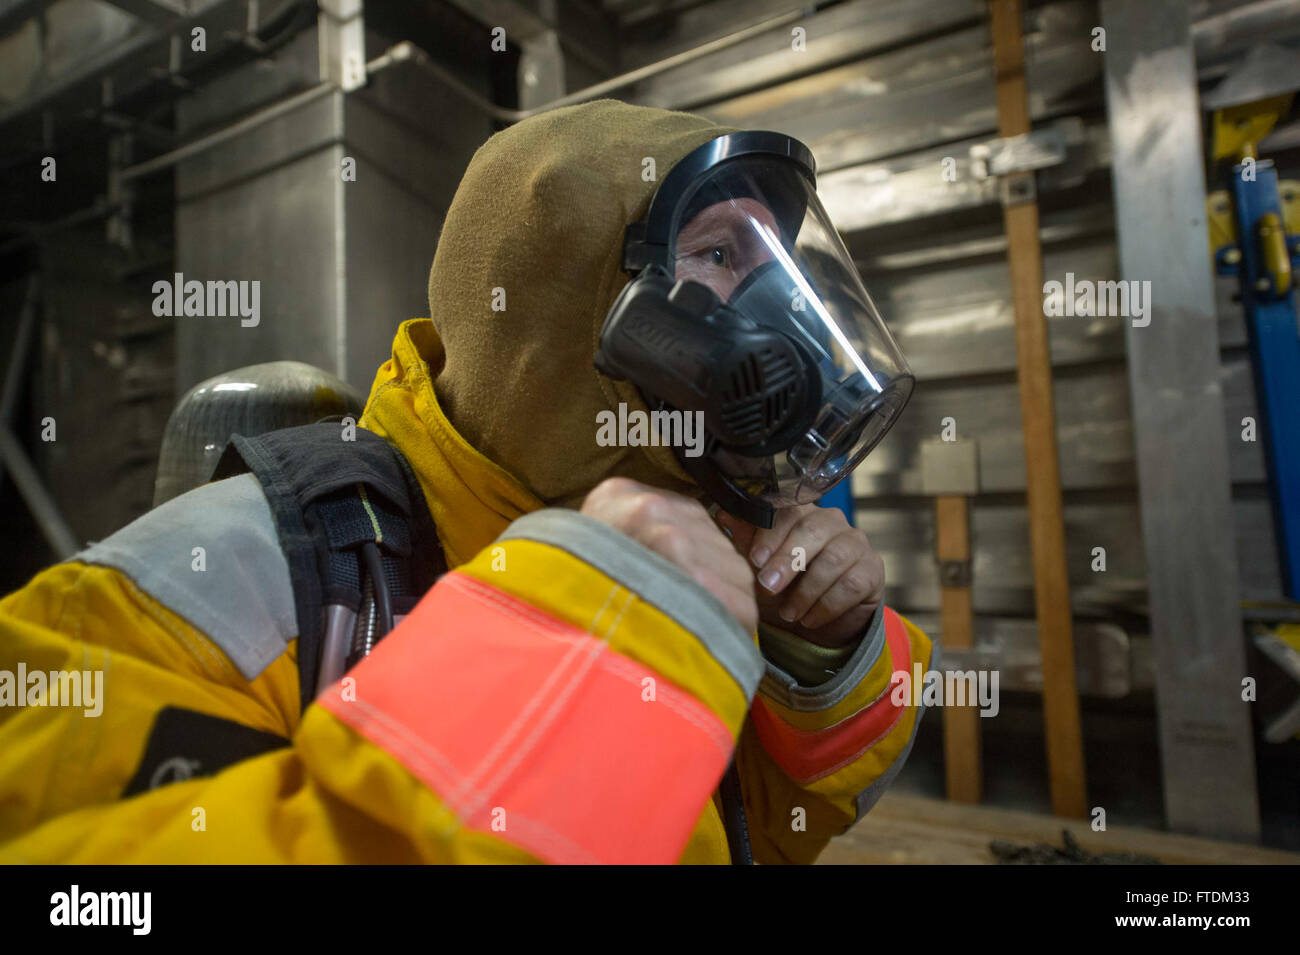 160205-N-WV703-119  ATLANTIC OCEAN (Feb. 05, 2016) - Boatswain's Mate Jimmie Connor, a civil service mariner, dons his personal protective gear during a firefighting drill aboard USNS Spearhead (T-EPF 1) Feb. 05, 2016. The Military Sealift Command expeditionary fast transport vessel USNS Spearhead is on a scheduled deployment in the U.S. 6th Fleet area of operations to support the international collaborative capacity-building program Africa Partnership Station. (U.S. Navy photo by Mass Communication Specialist 3rd Class Amy M. Ressler/Released) Stock Photo